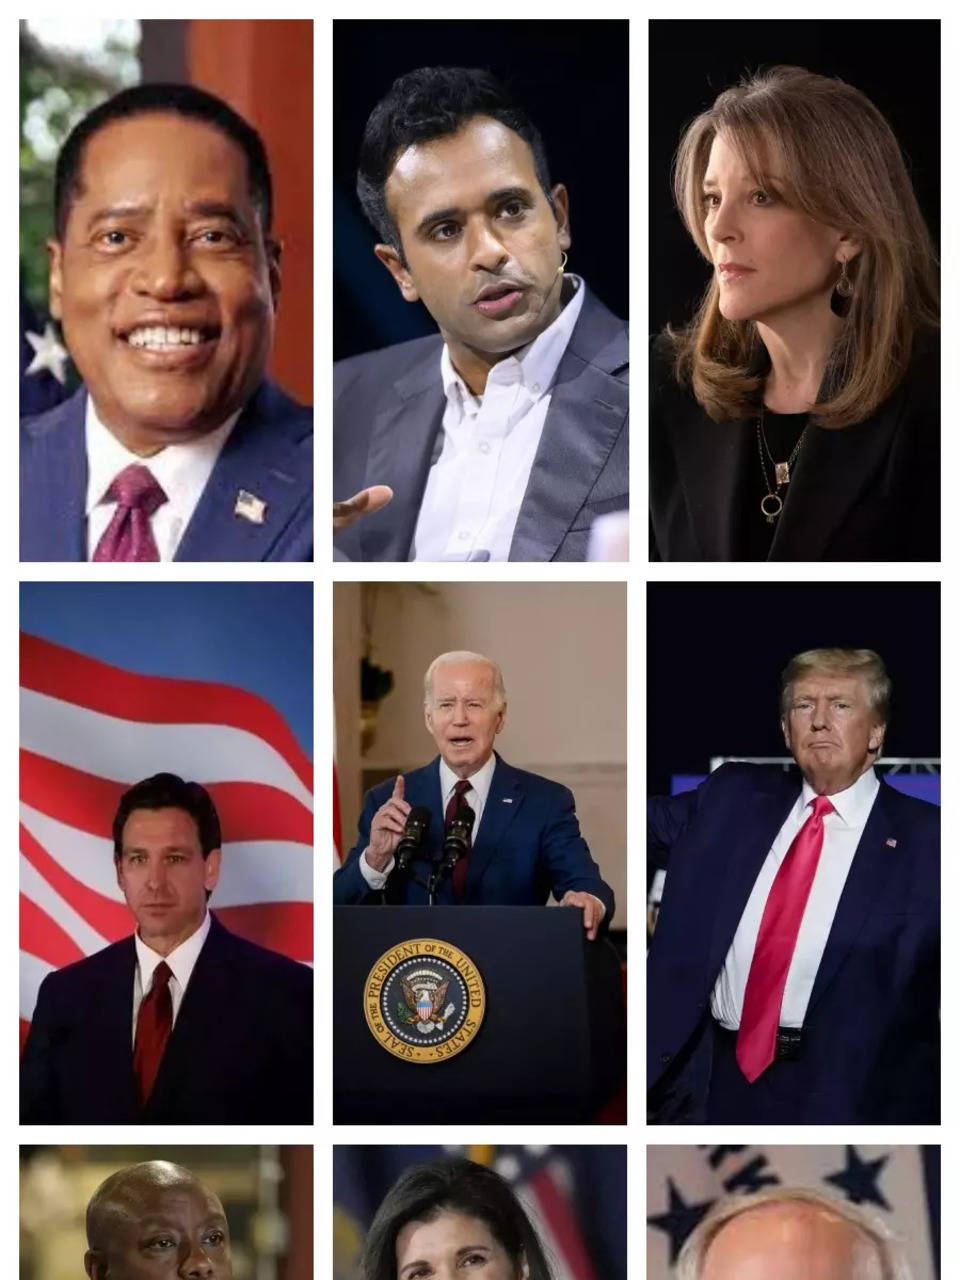 Meet the 2020 Presidential Candidates